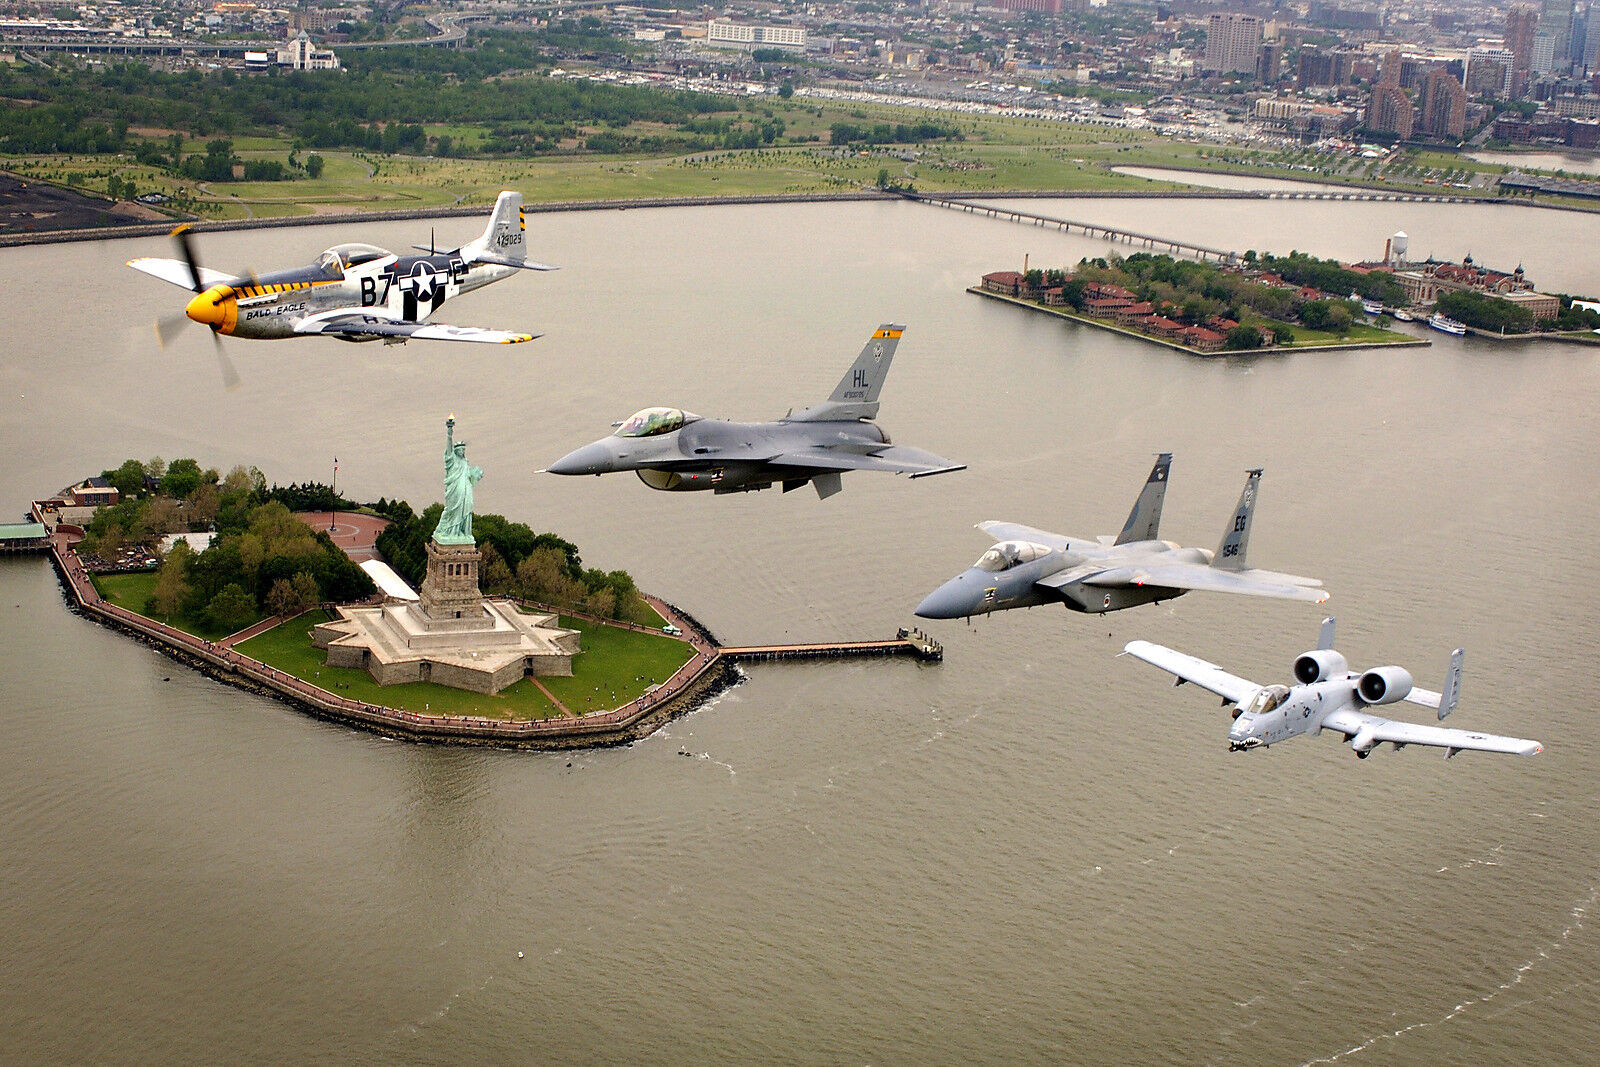 8x12 Photo P-51 Mustang-F-16-F-15 & A-10 Thunderbolt Fly Over Statue of Liberty